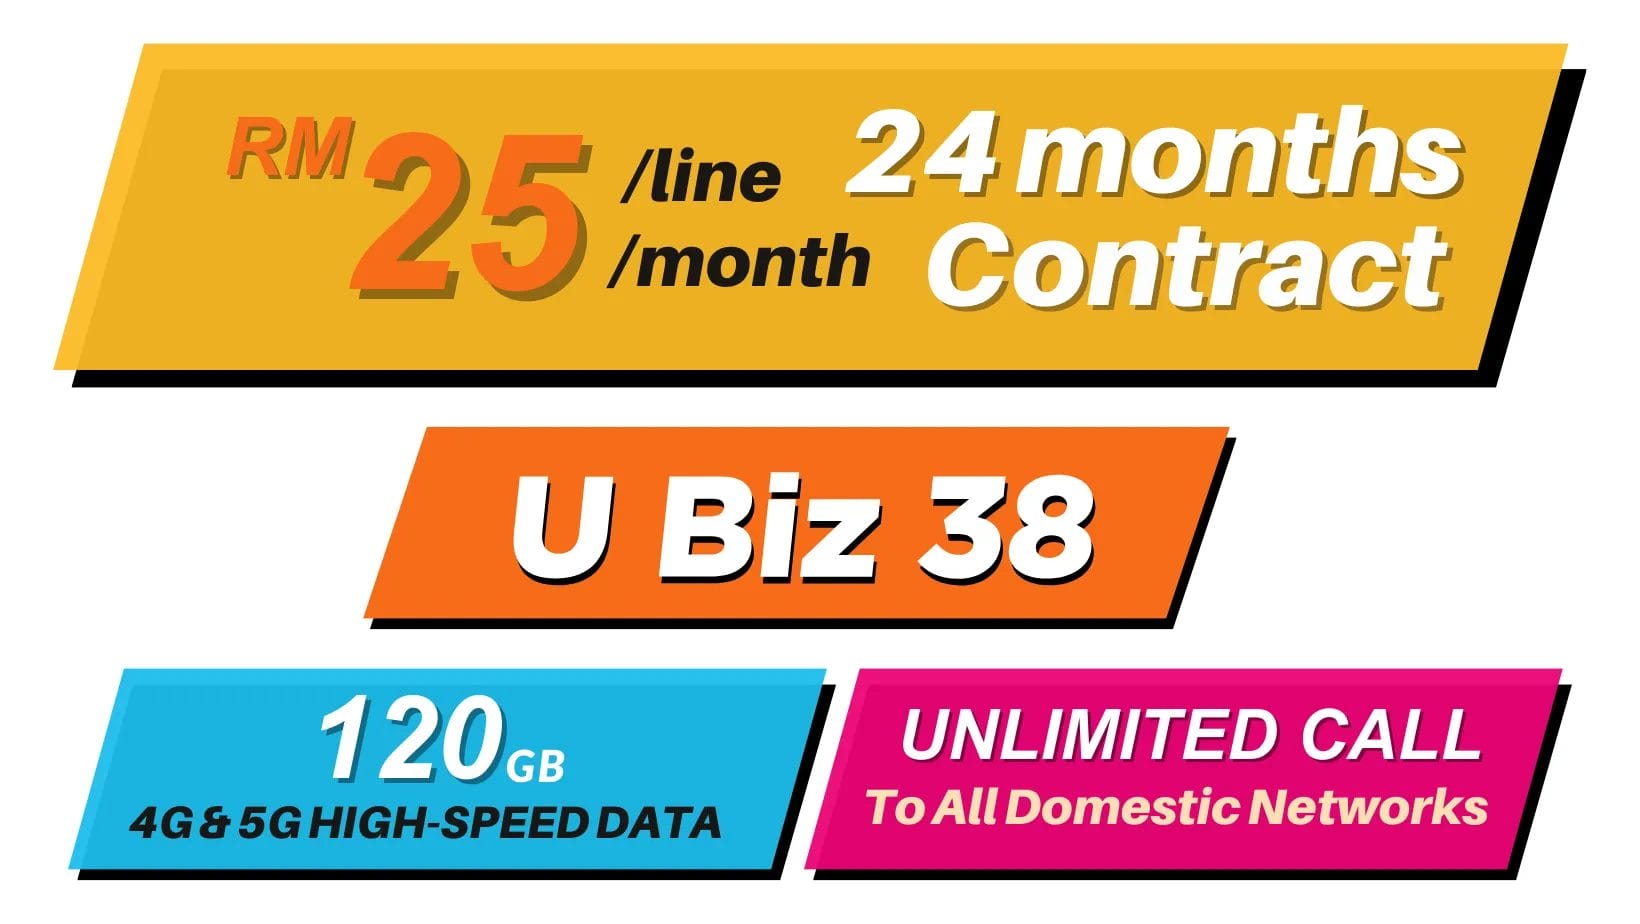 U Mobile Postpaid 38 with contract plan